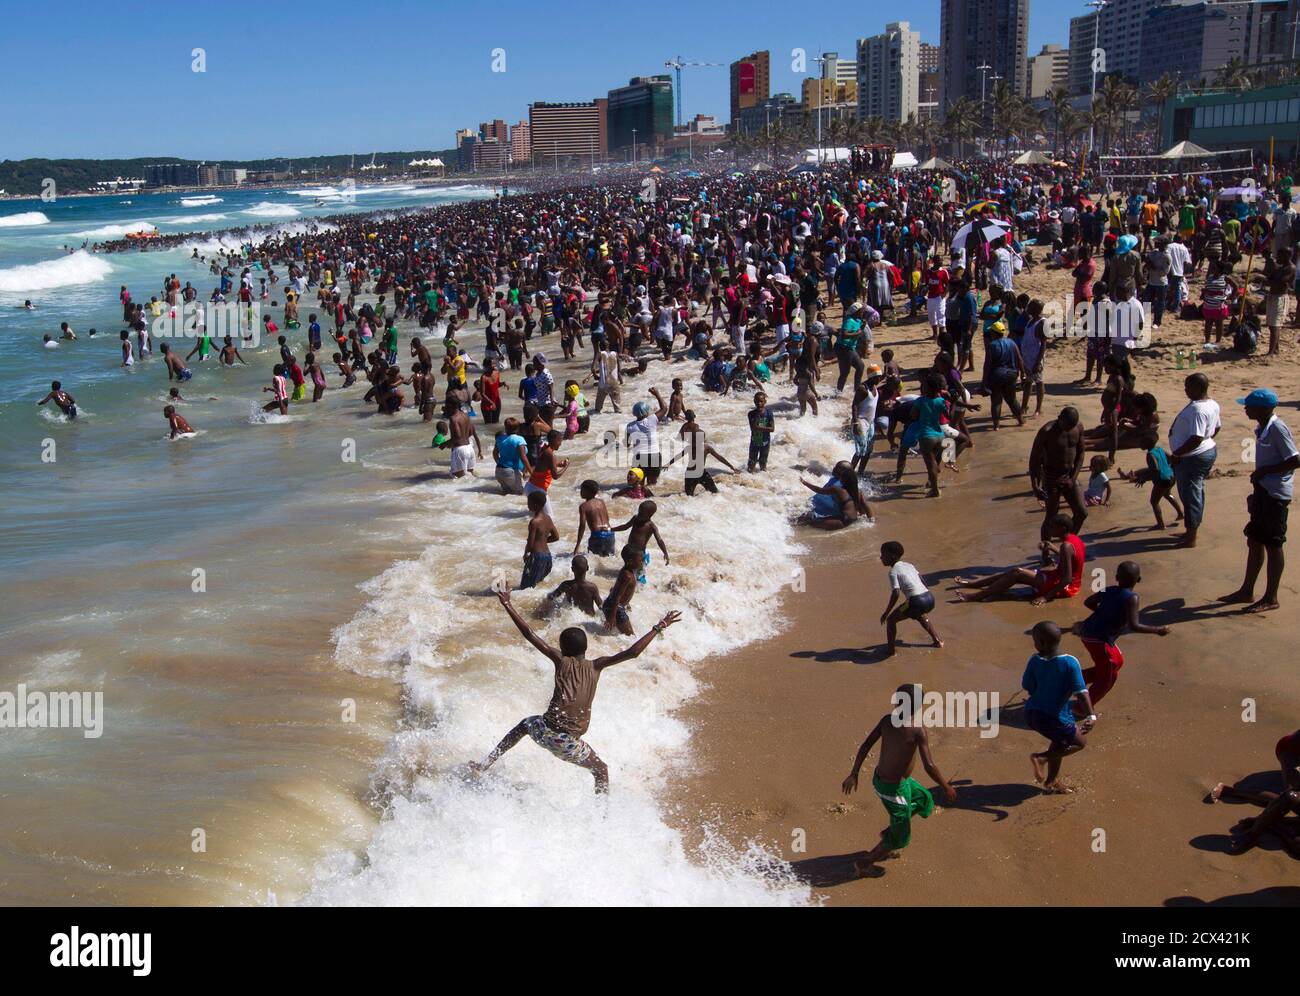 People visit the beach on New Year's Day in Durban January 1, 2014. REUTERS/Rogan Ward (SOUTH AFRICA - Tags: SOCIETY) Stock Photo